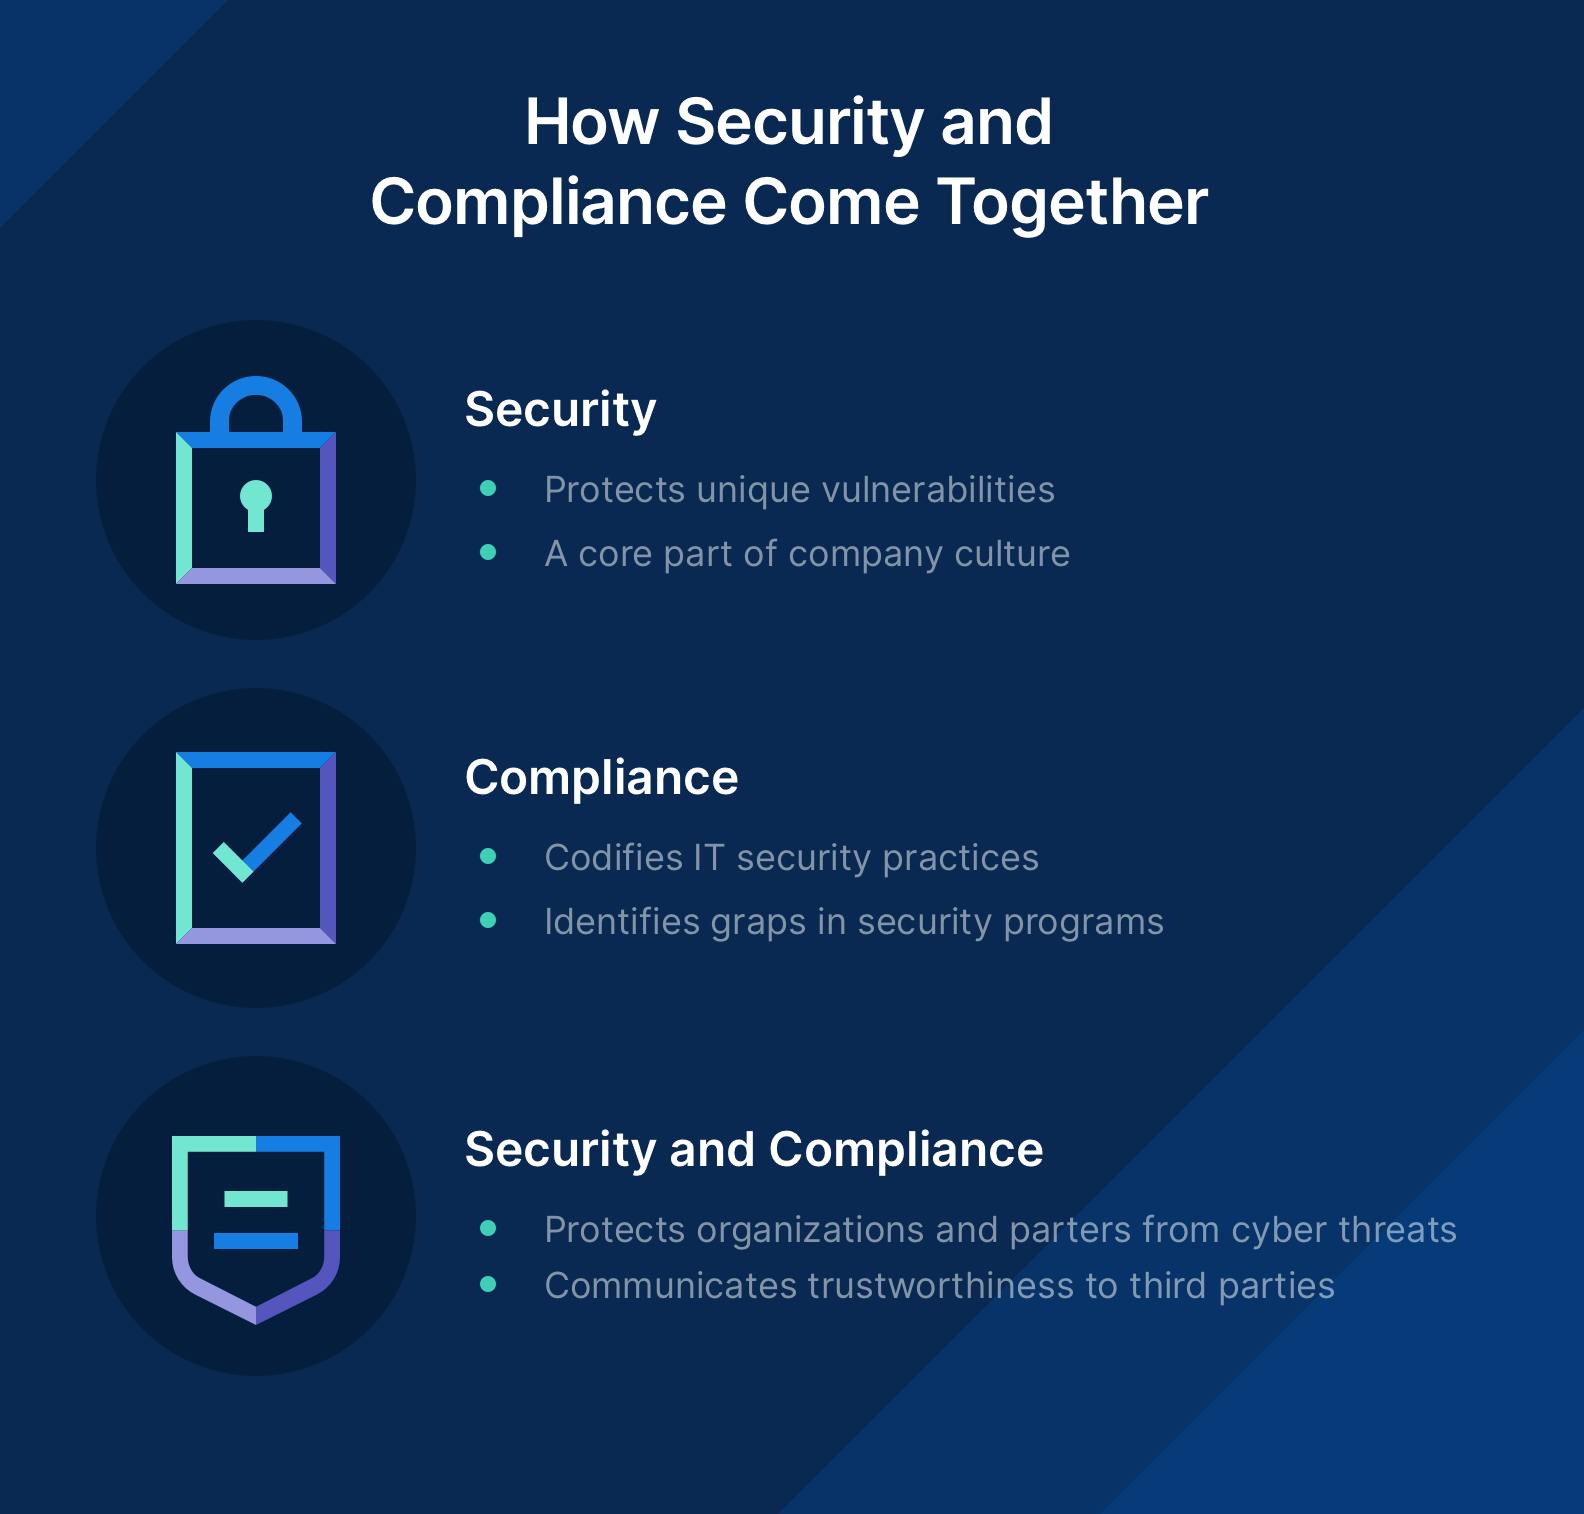 Chart defining security and compliance respectively as well as their common goals of protecting from cyber threats